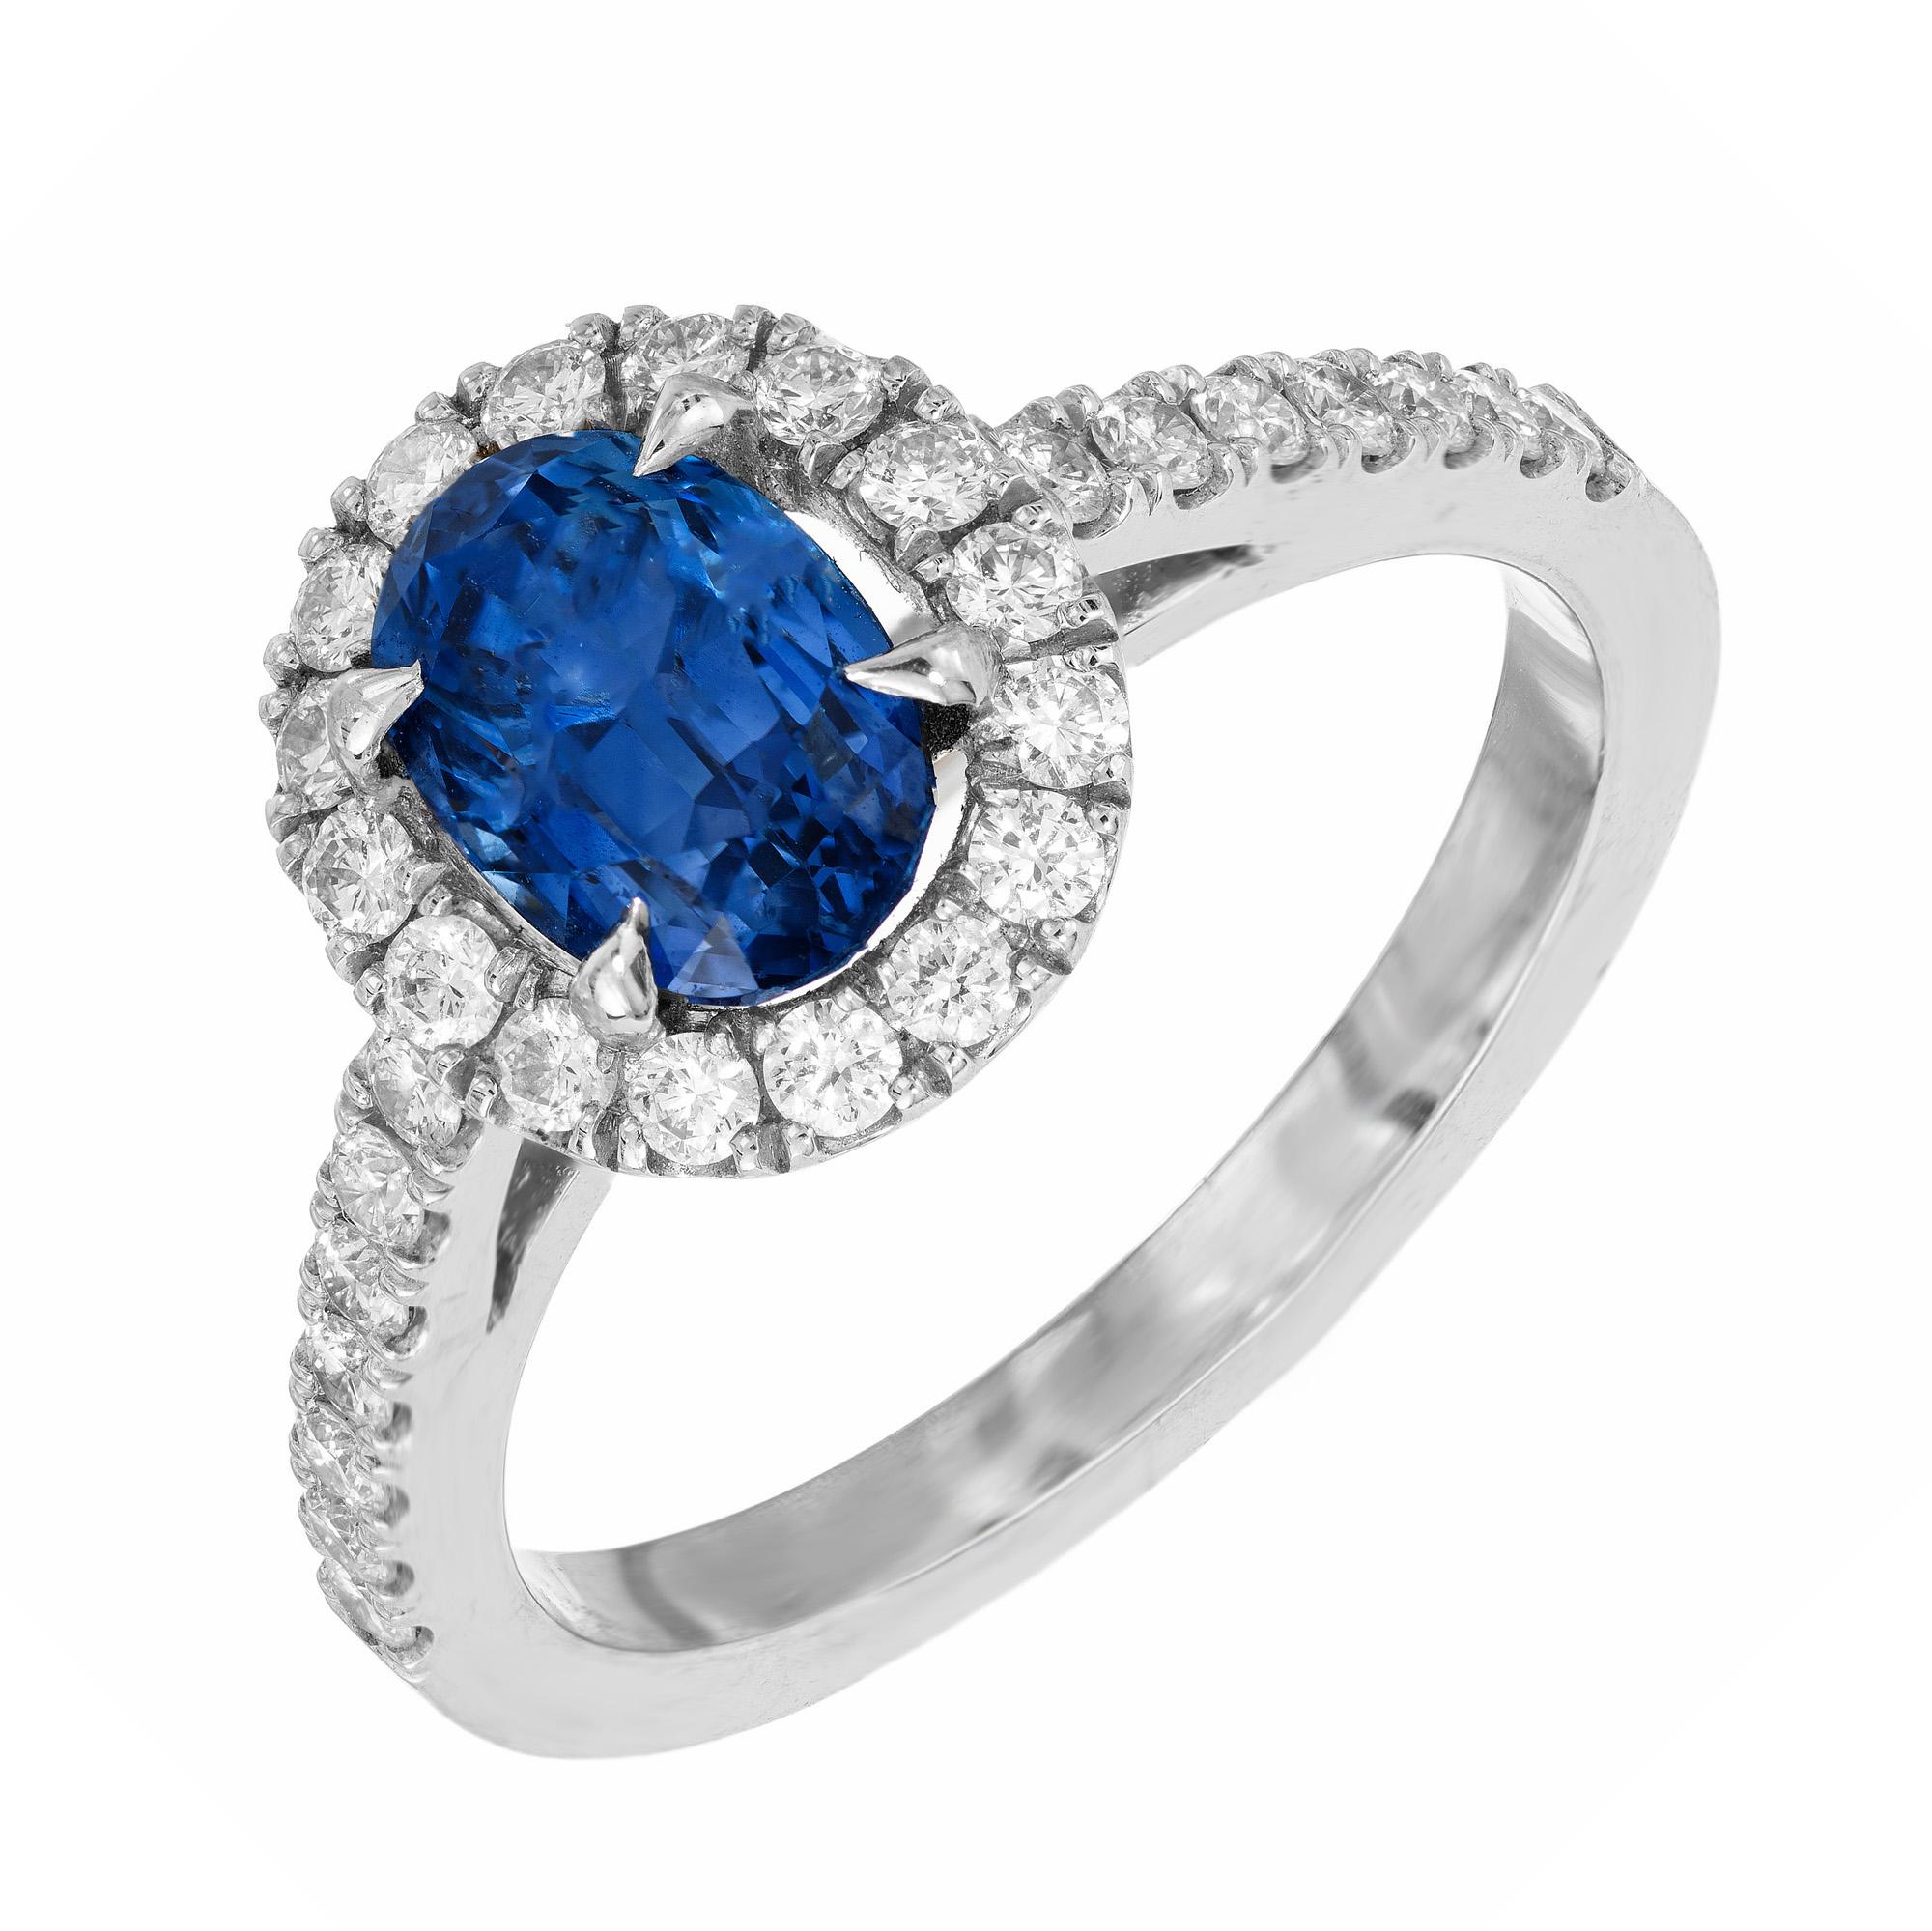 Peter Suchy sapphire and diamond engagement ring. The center piece of this ring is a 1.77ct oval sapphire mounted in 18k white gold with a a halo of round cut diamonds. Accented with diamonds along both sides of the shank. AGL has certified it a